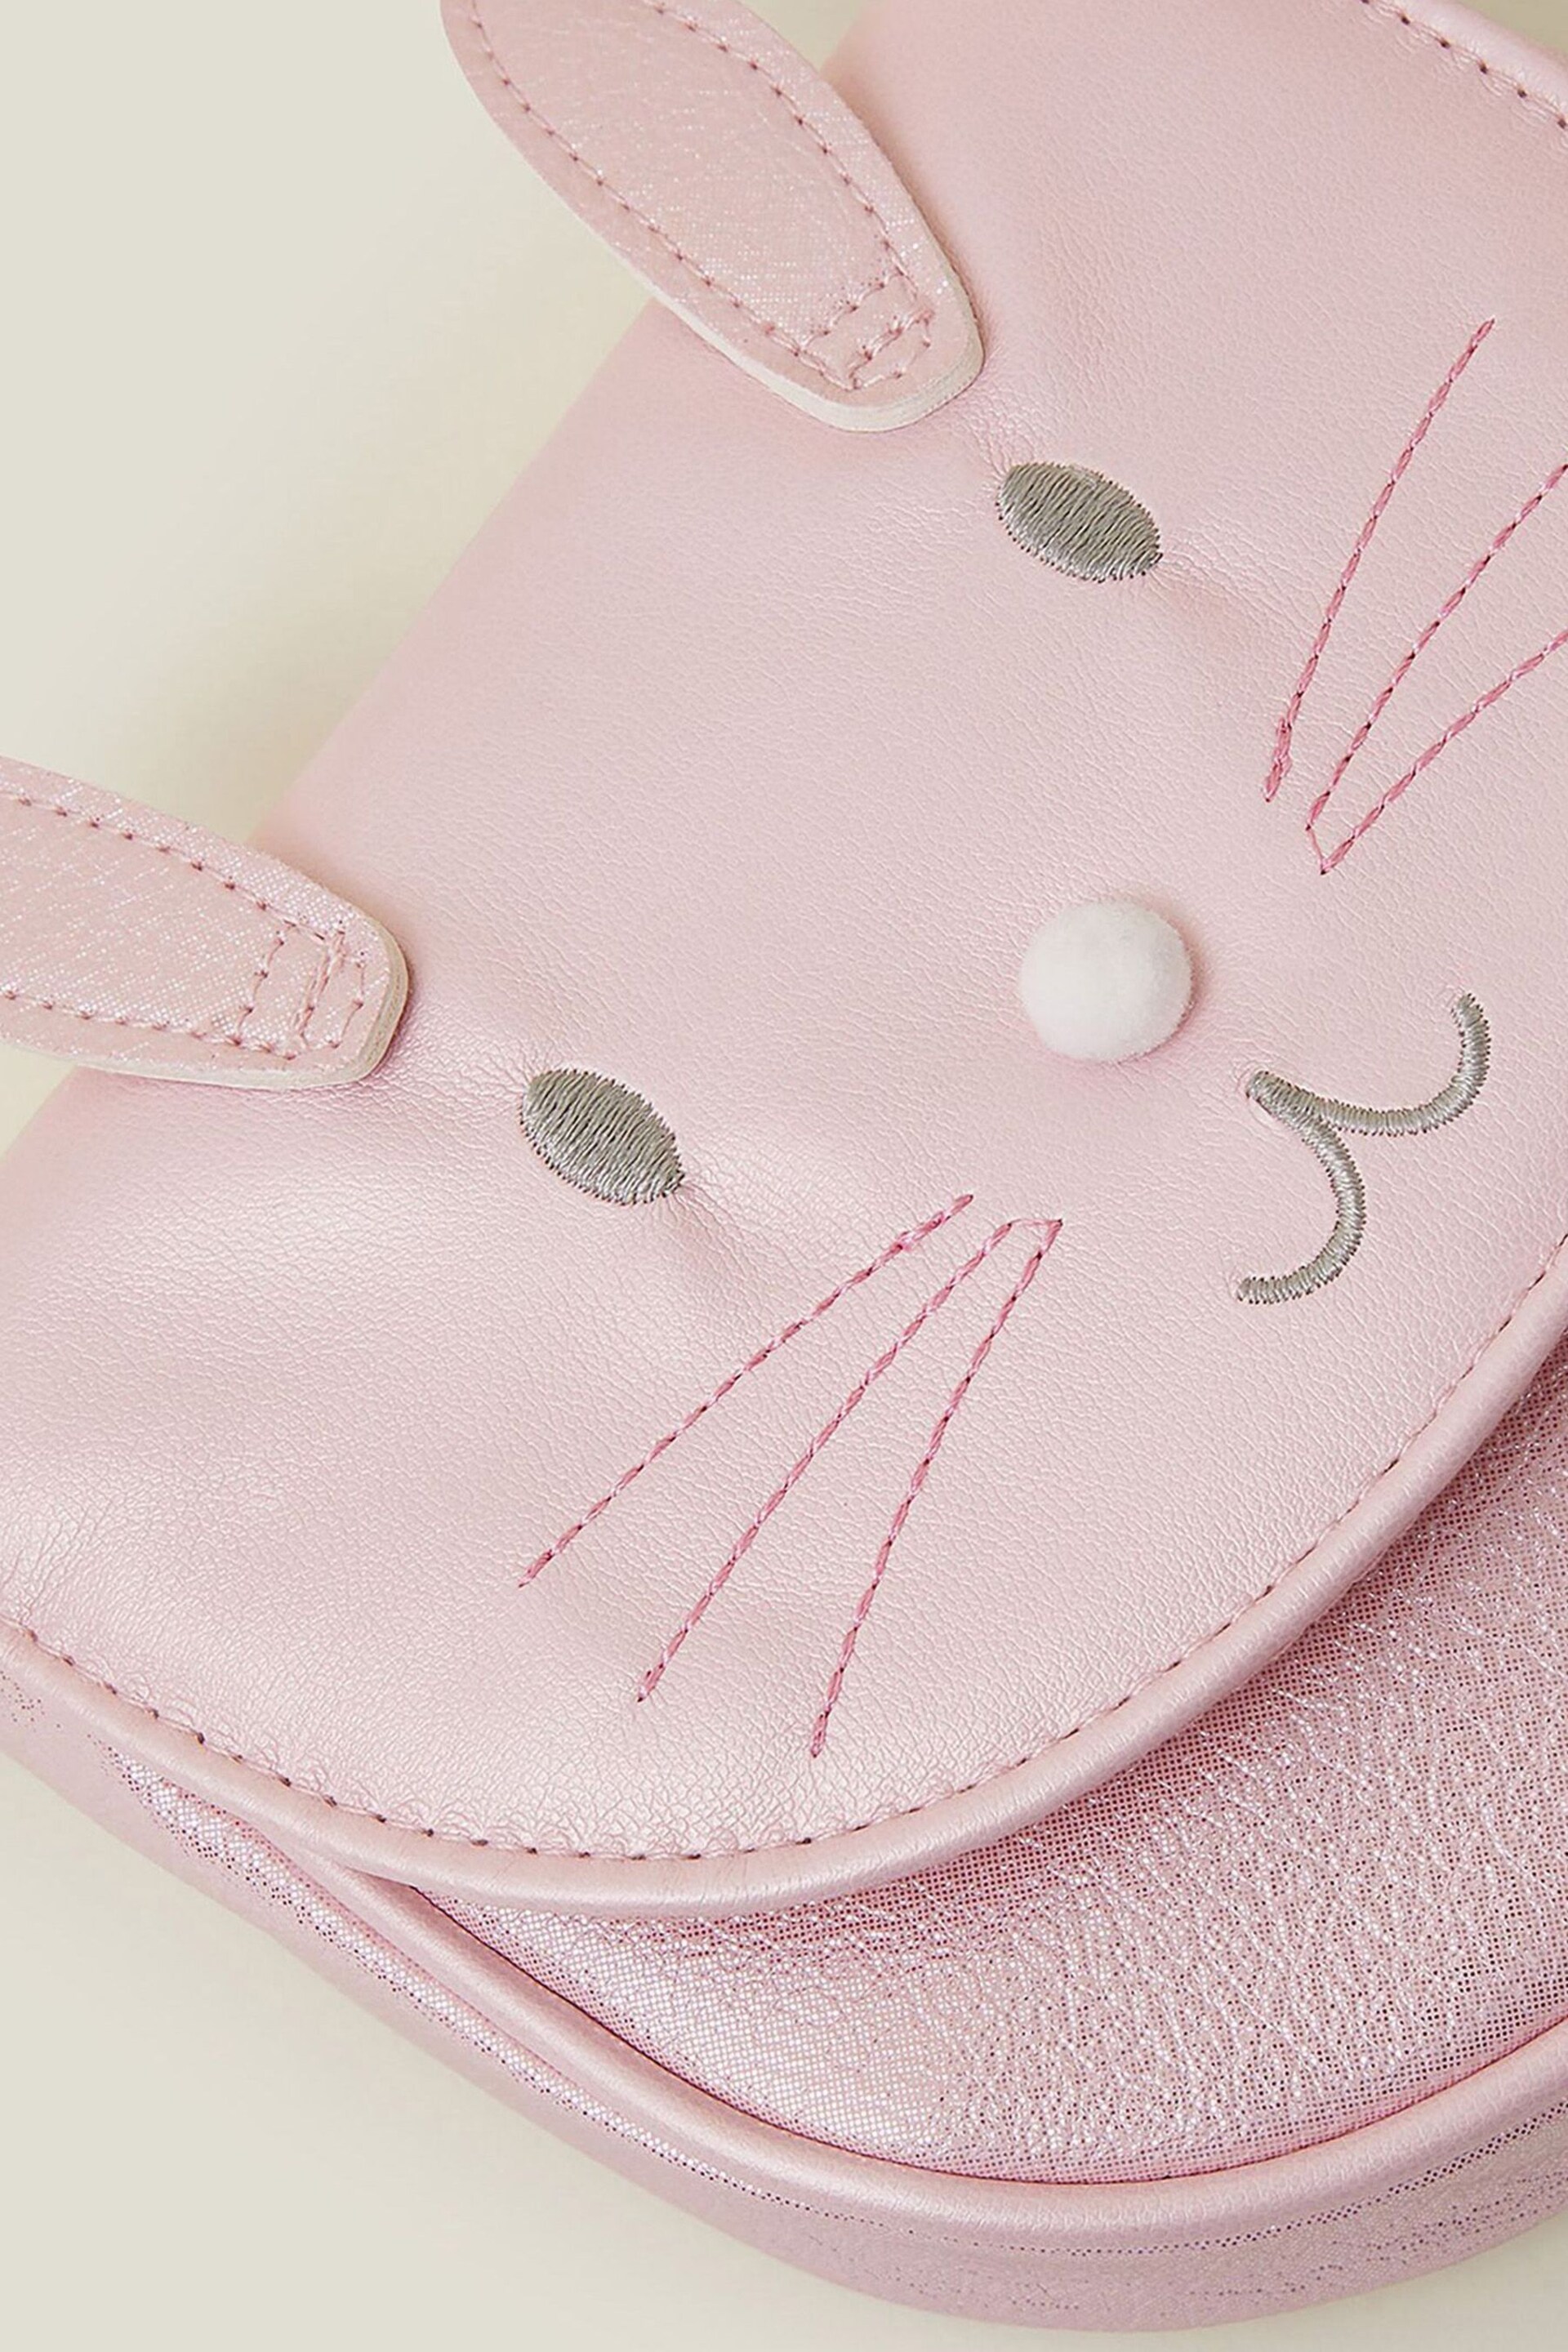 Accessorize Pink Girls Bunny Cross-Body Bag - Image 3 of 3